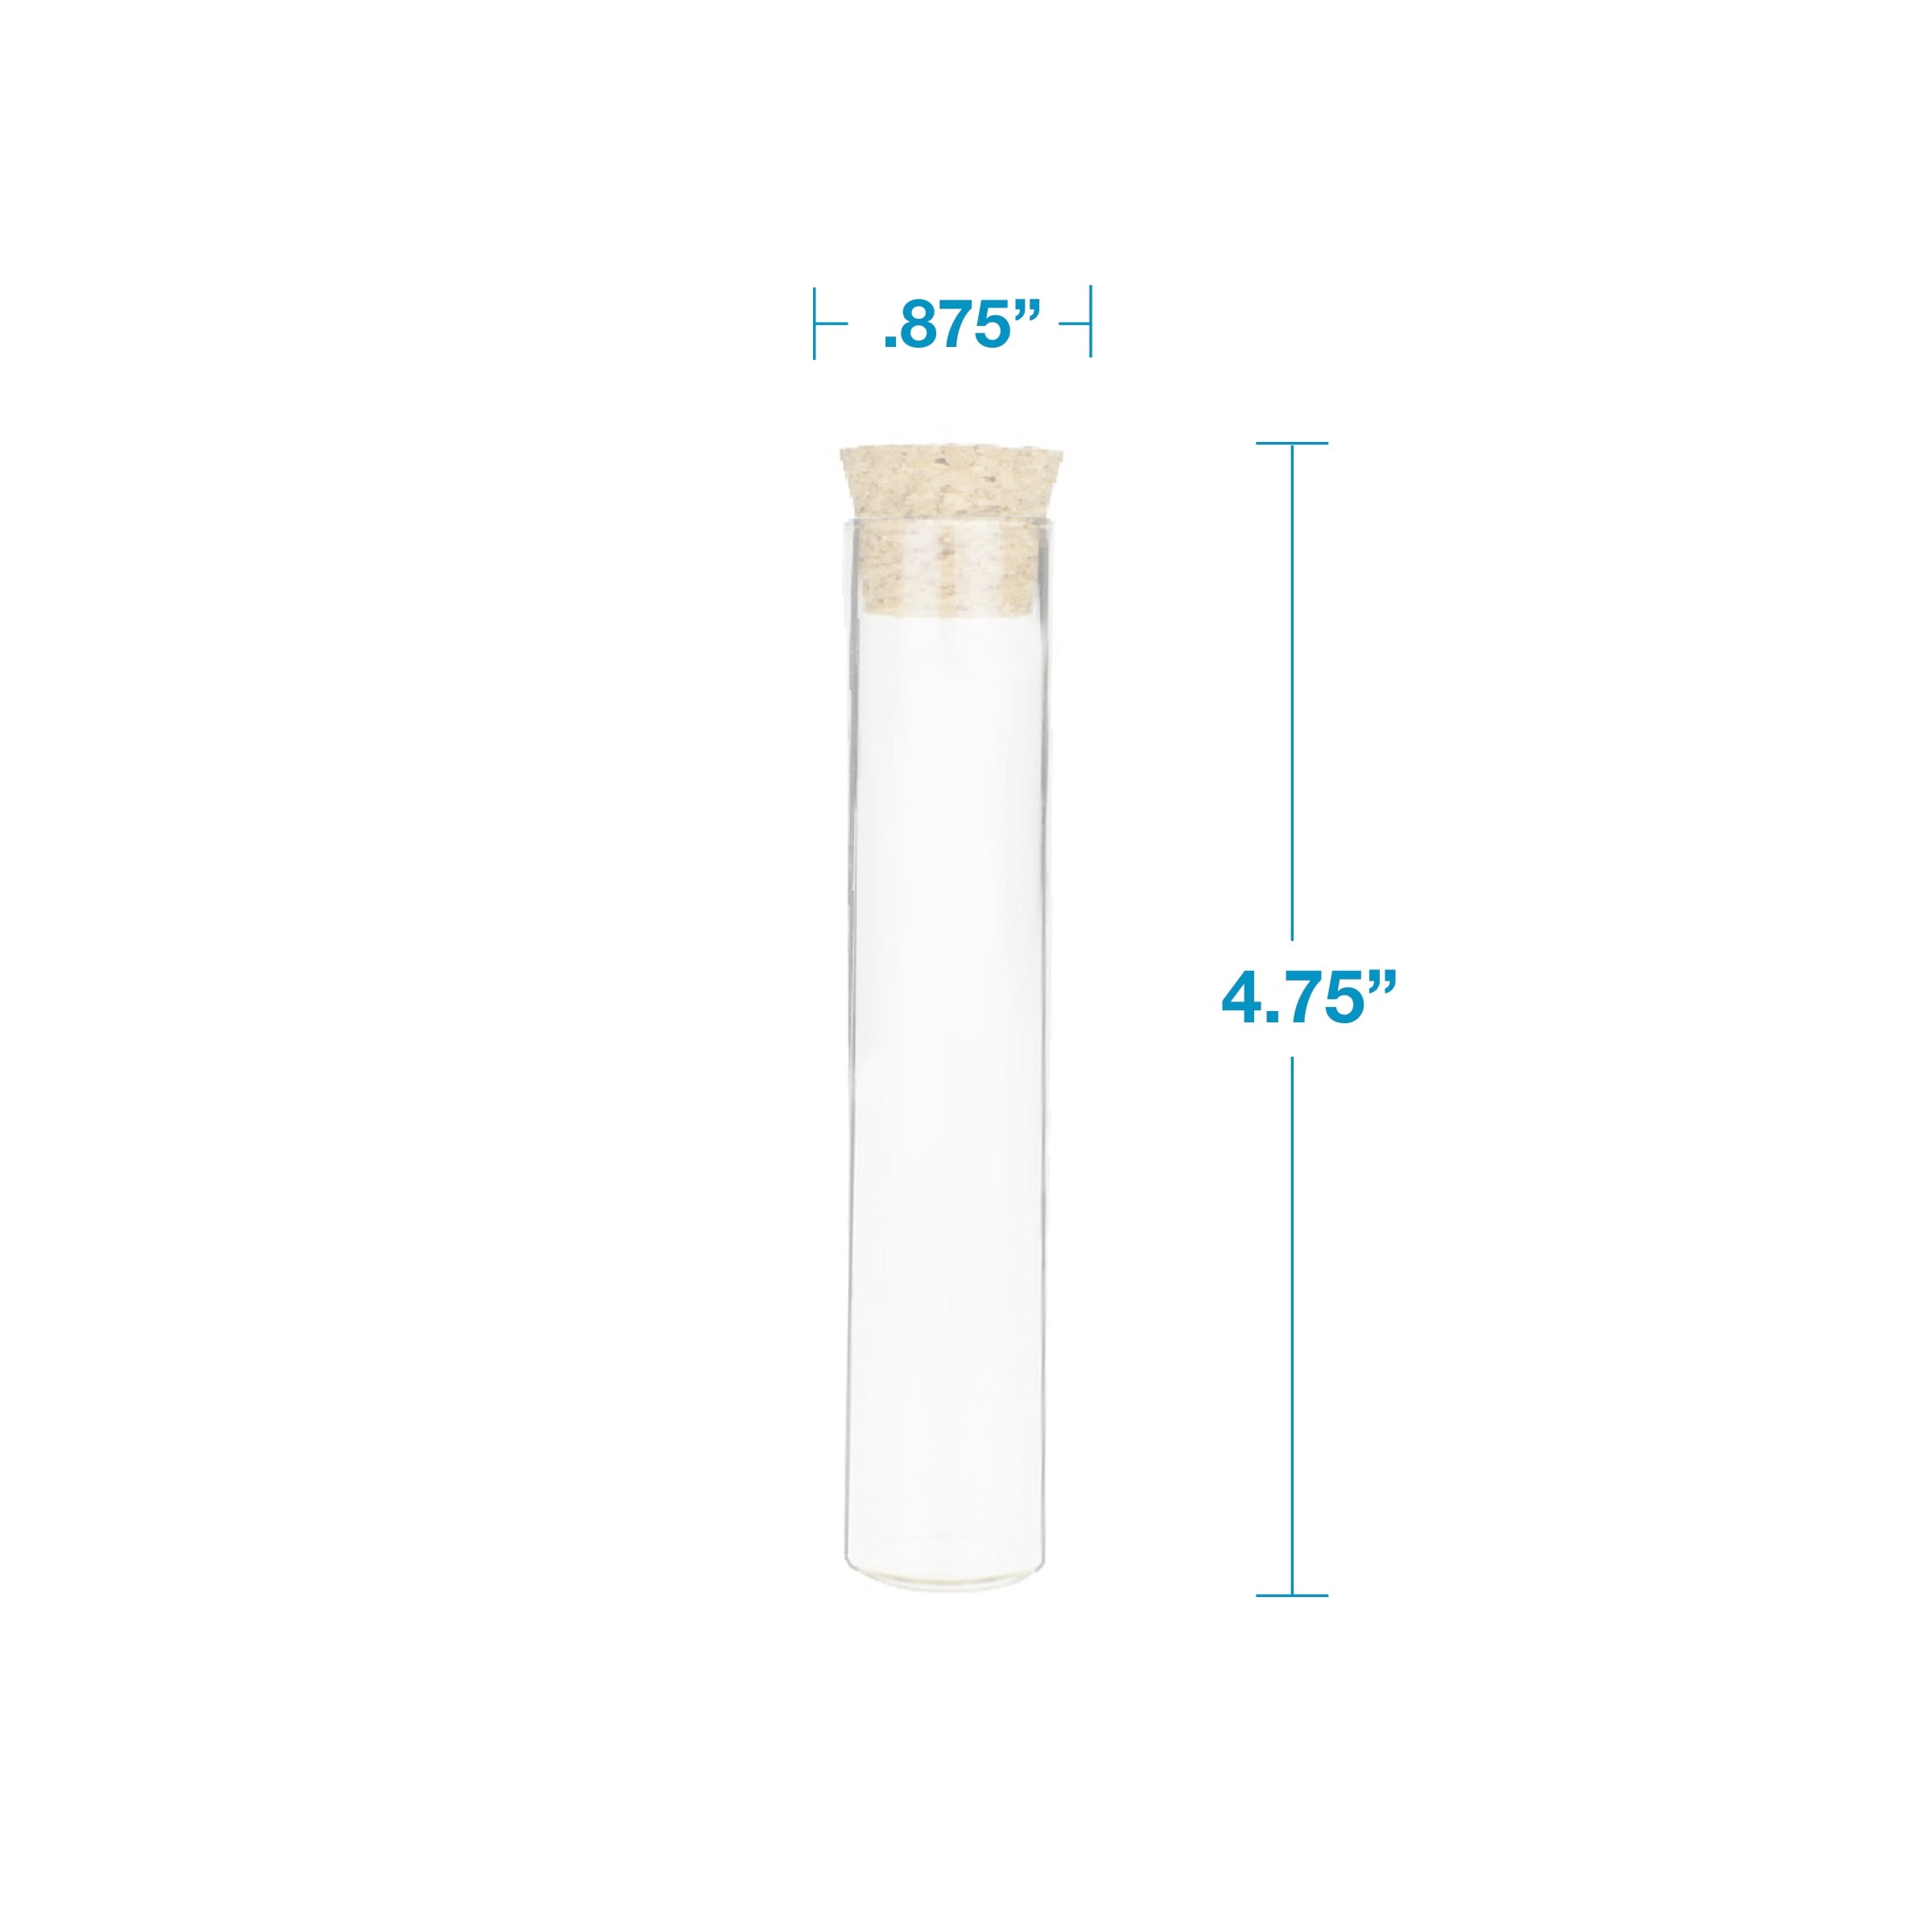 130mm Glass Pre-Roll Tubes with Cork – Standard Width (400 Tubes)